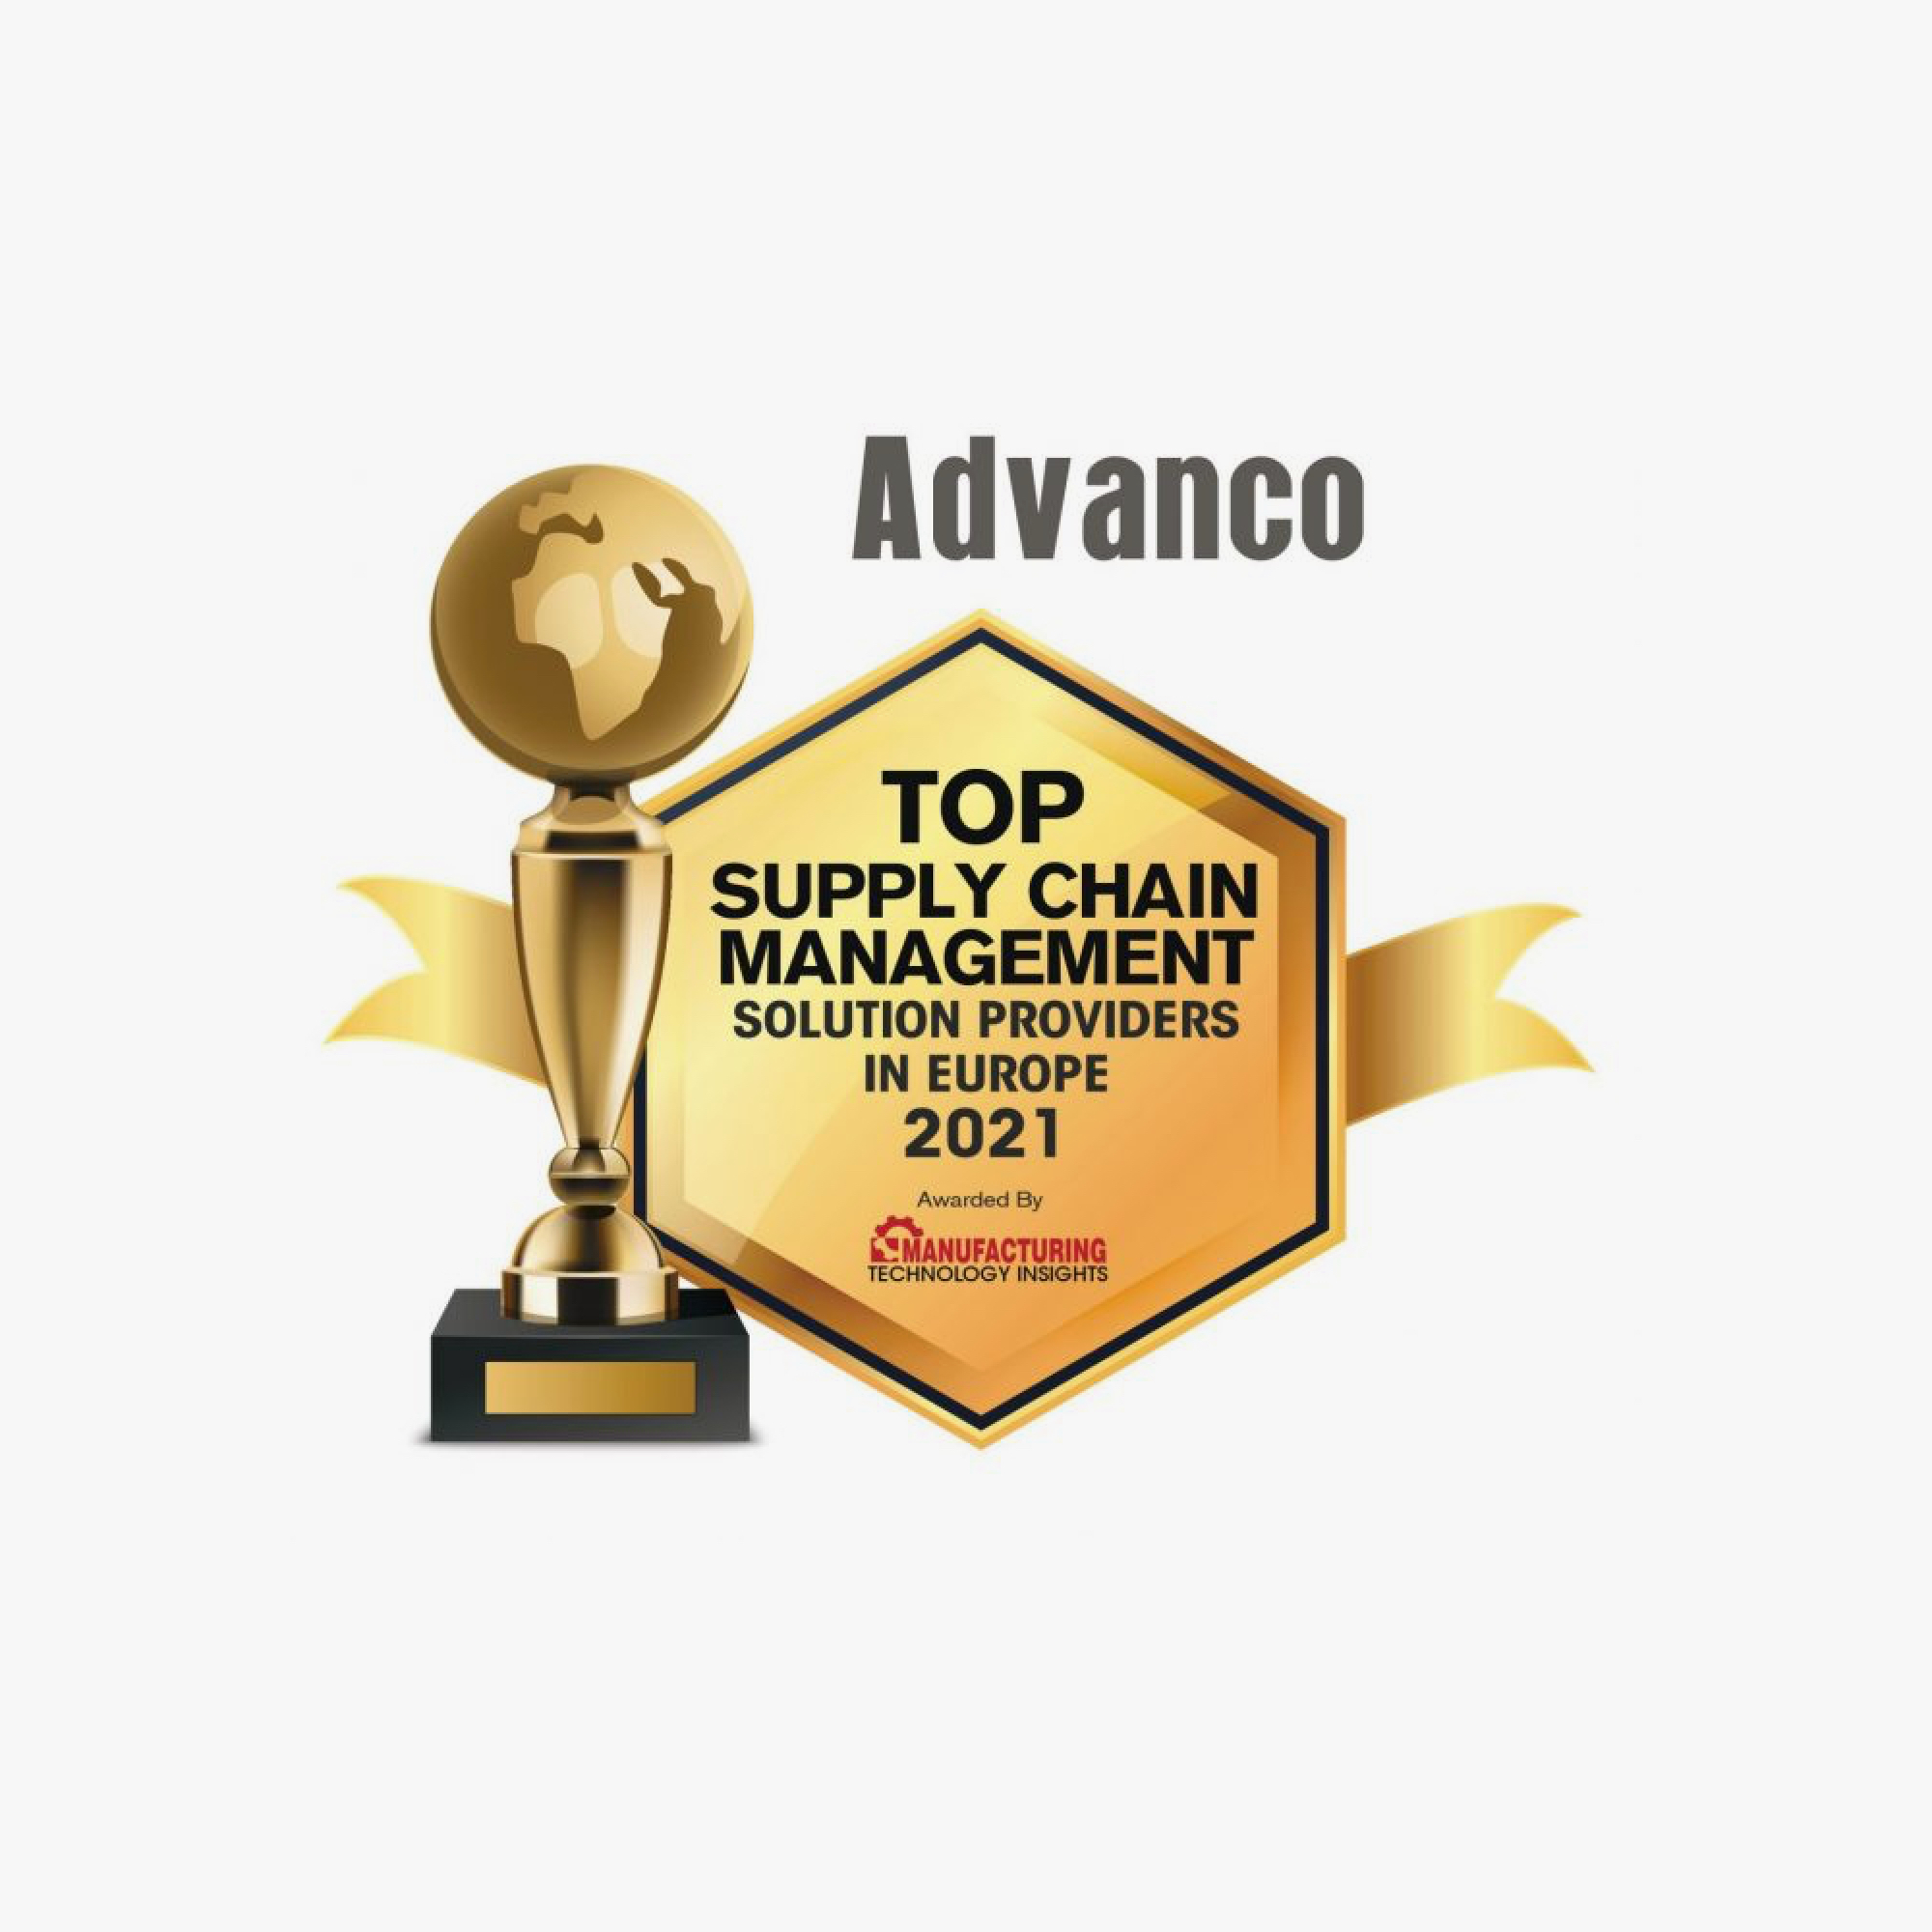 Advanco is one of the „Top Supply Chain Management Solution Providers“ in Europe 2021